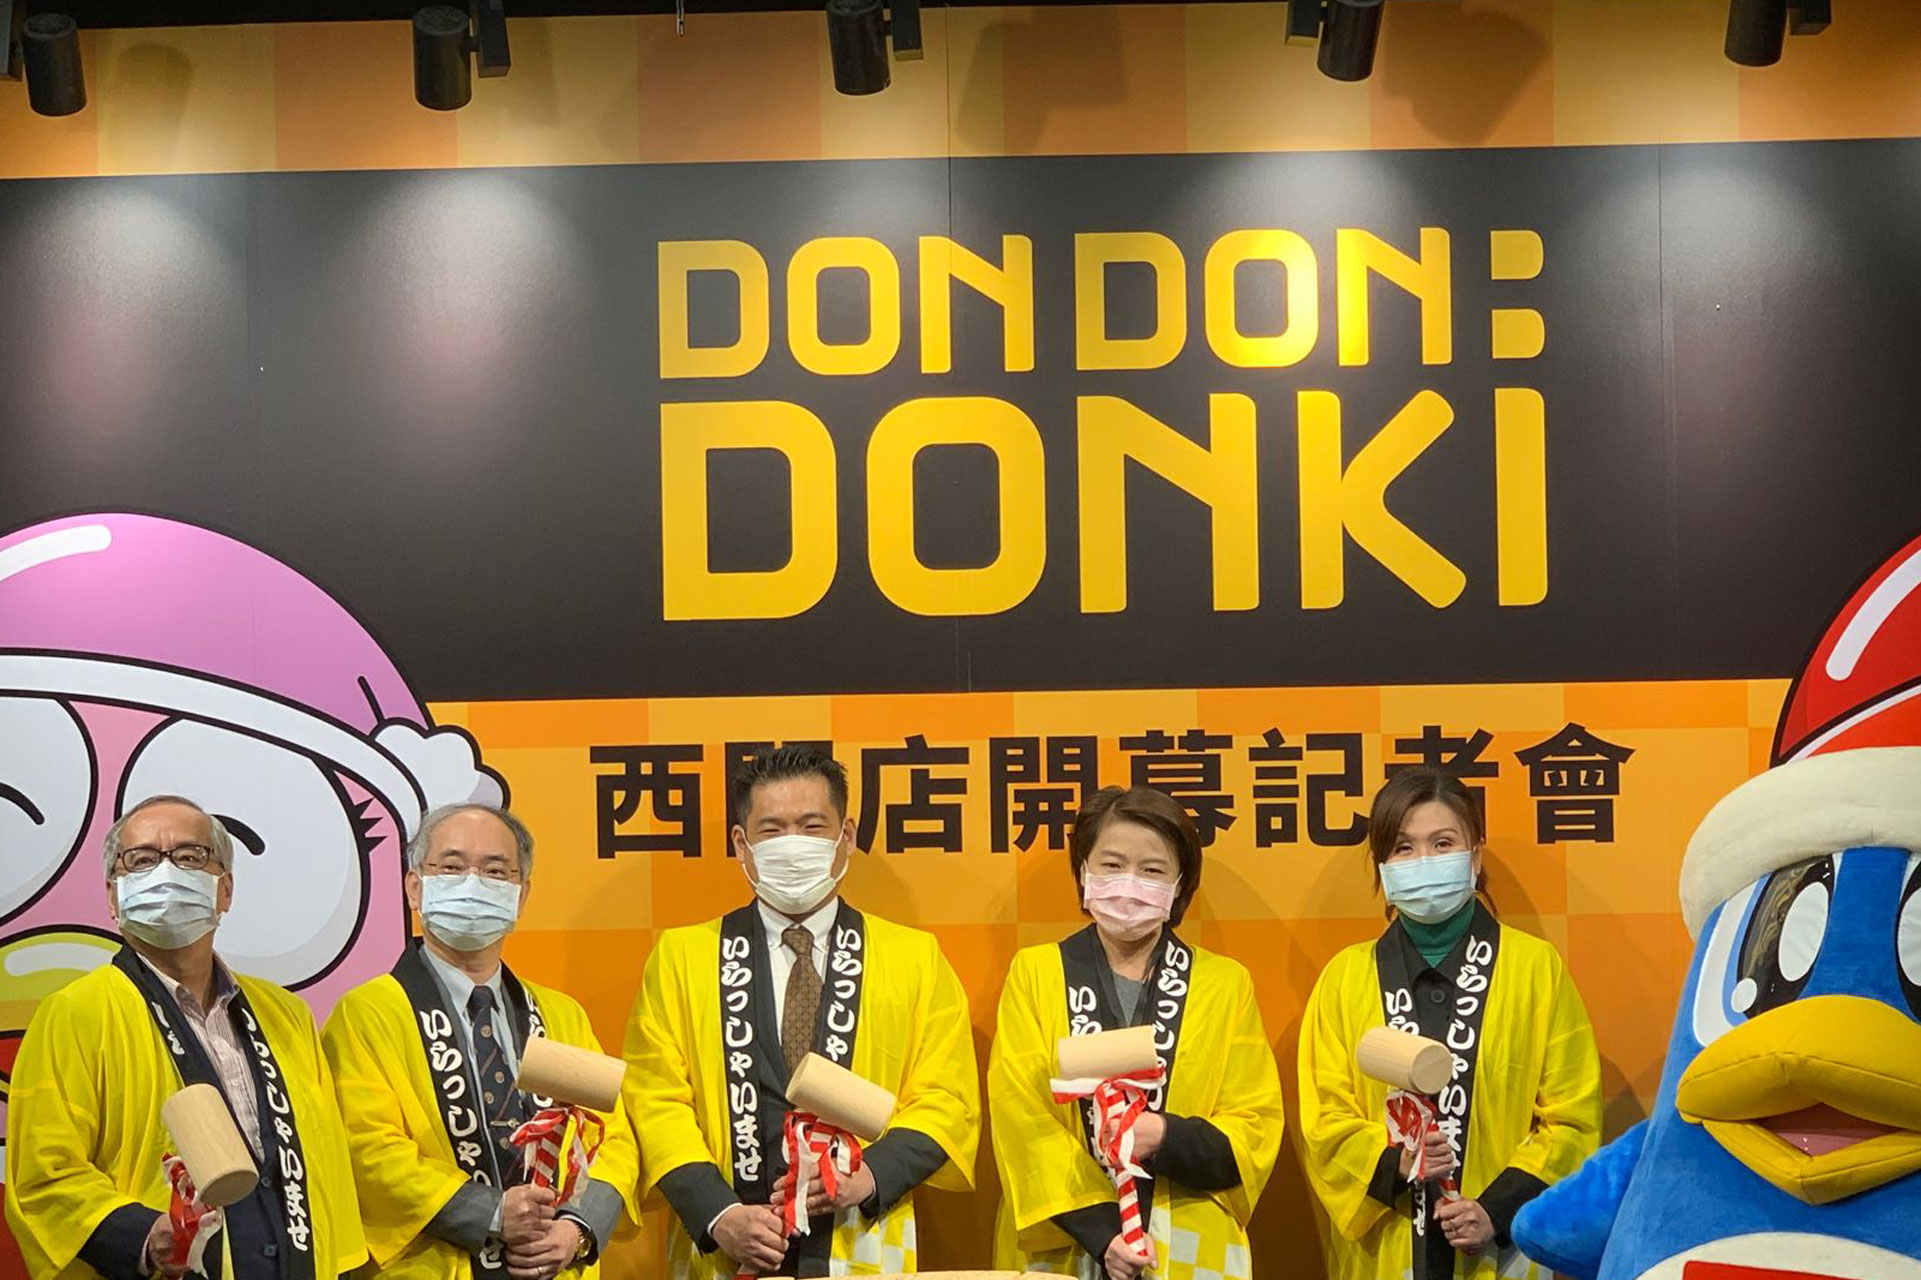 Japanese Retailer Don Quijote Co., Ltd. Opens First Store in Taiwan Photo-1